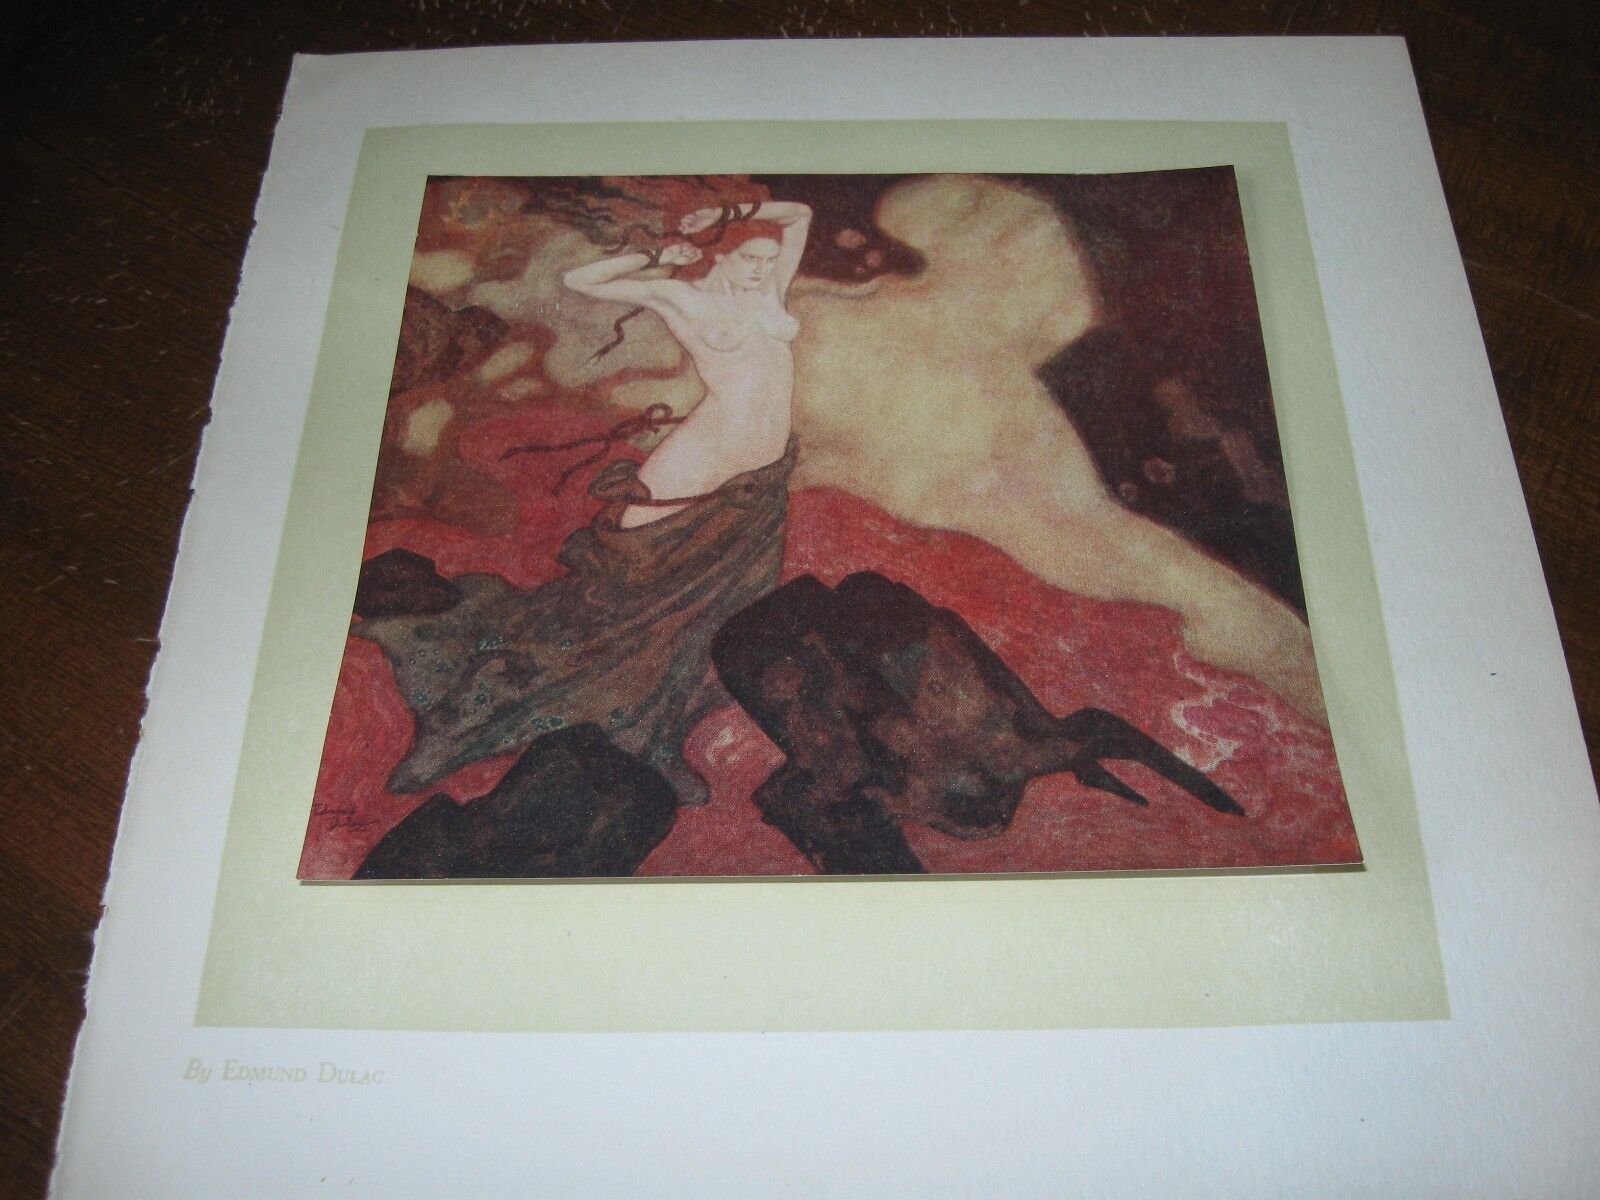 1914 Art Print - EDMUND DULAC of NUDE RED HEAD GIRL WOMAN BOUND FIRE WWI Tied Up